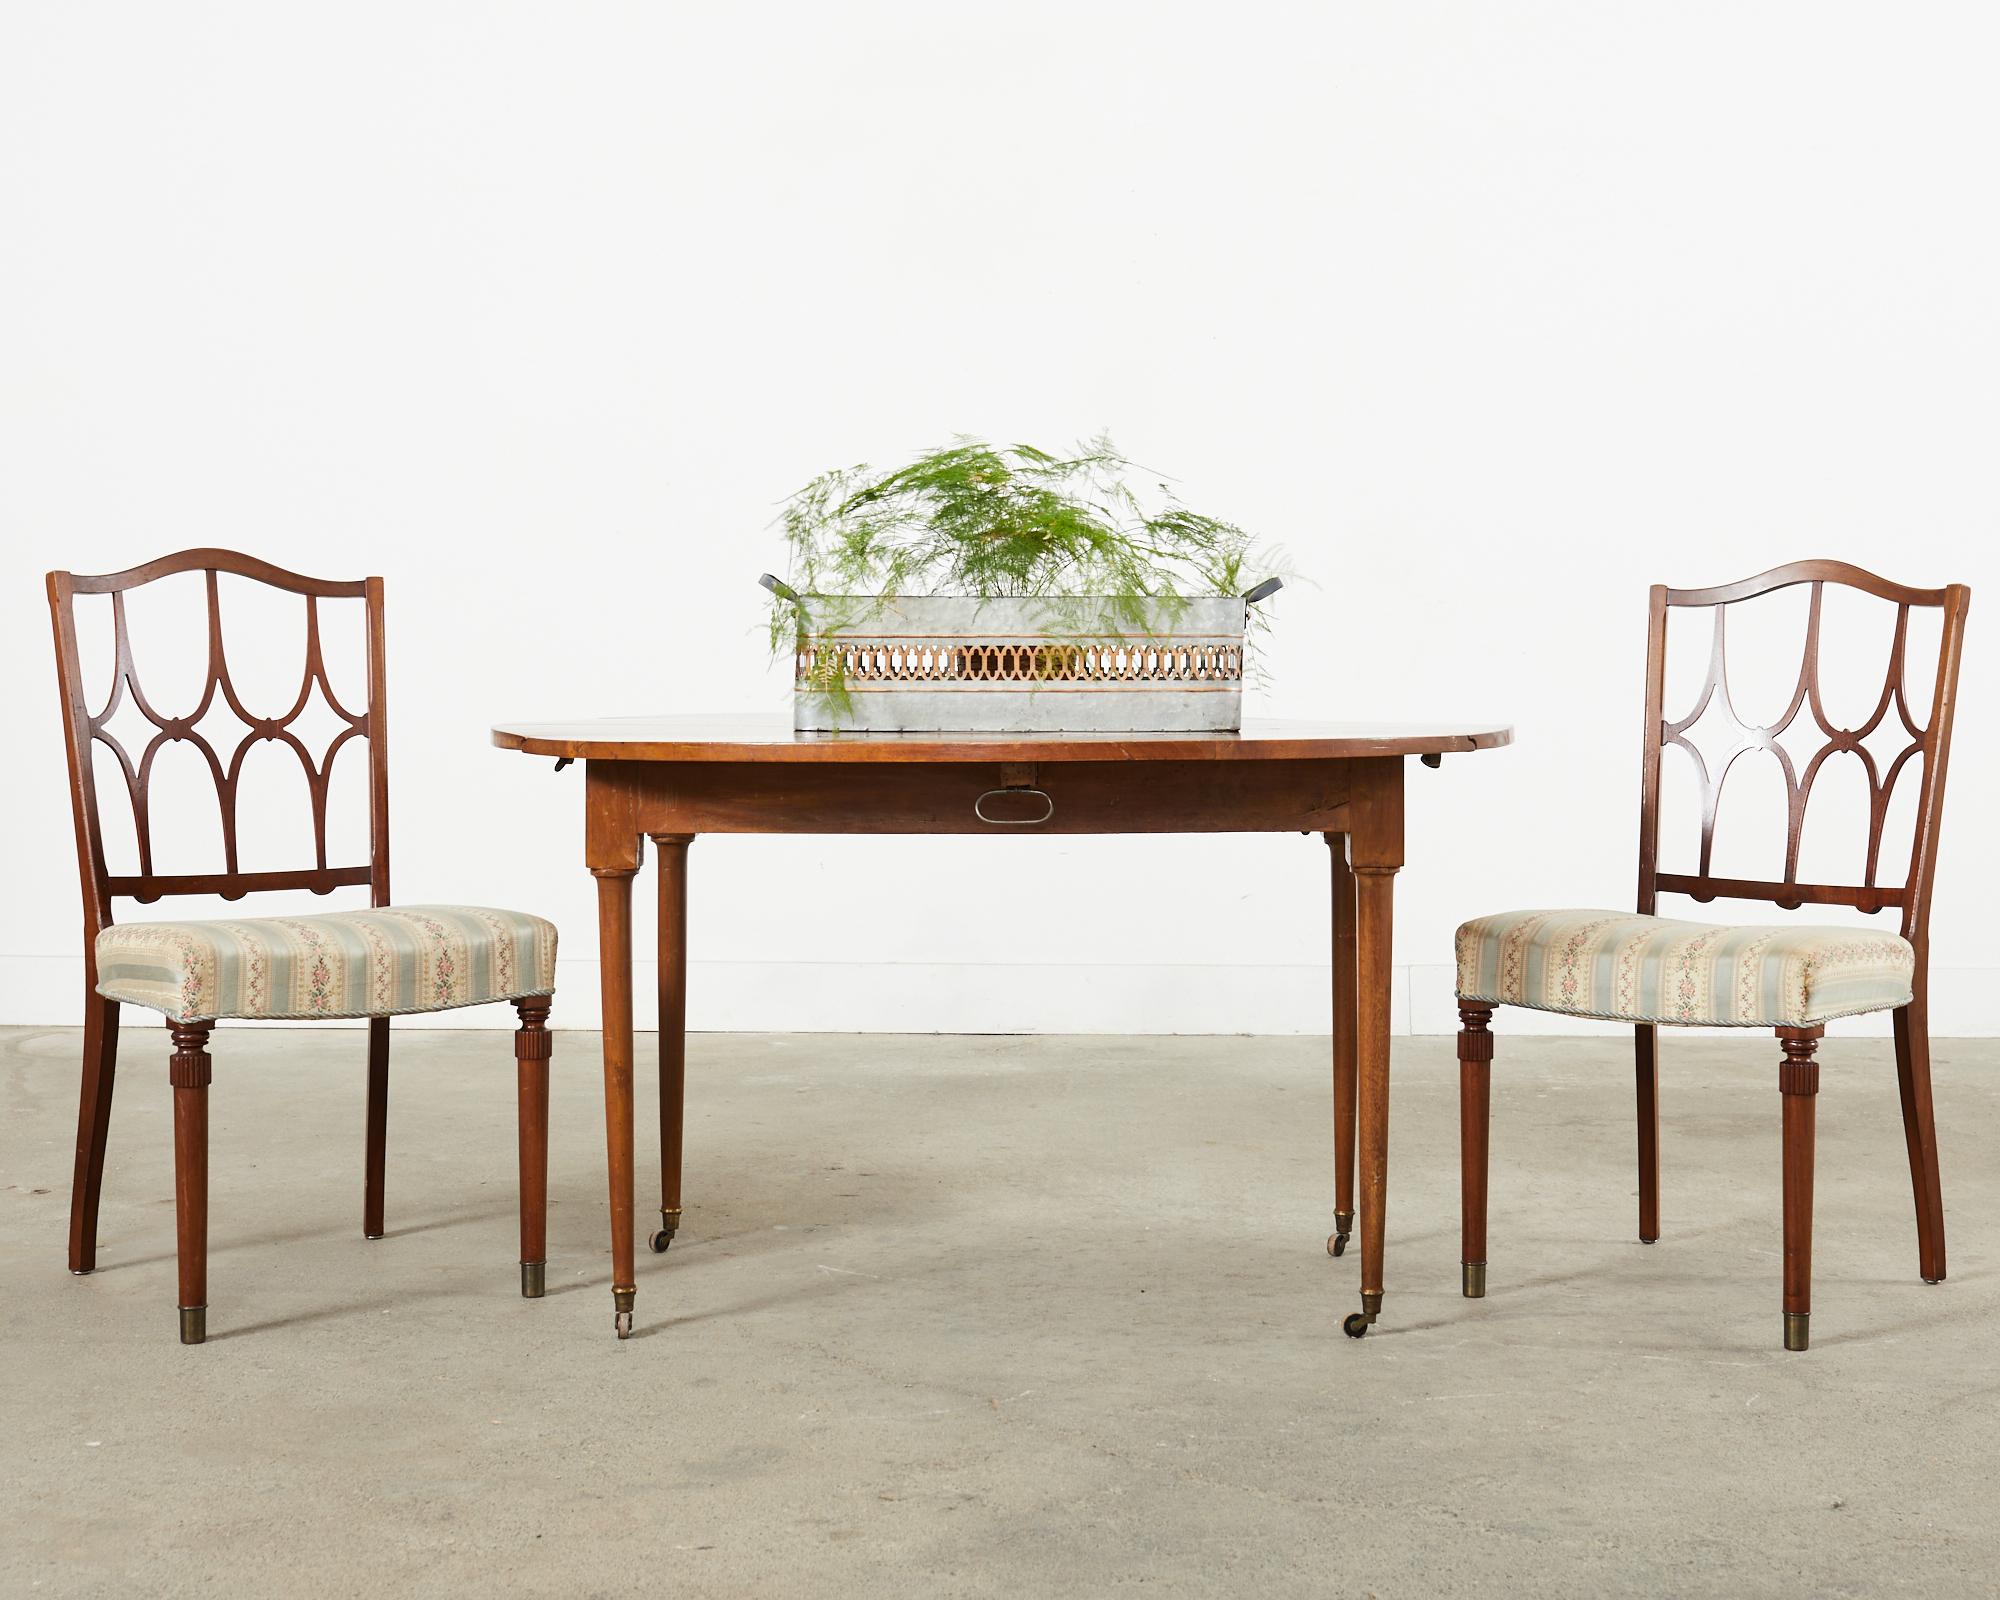 Charming set of six Italian mid-century modern dining chairs featuring distinctive pierced slat backs in the style and manner of Billy Haines. The chairs have a graceful curved hump back and turned legs in the front ending with brass sabots. The